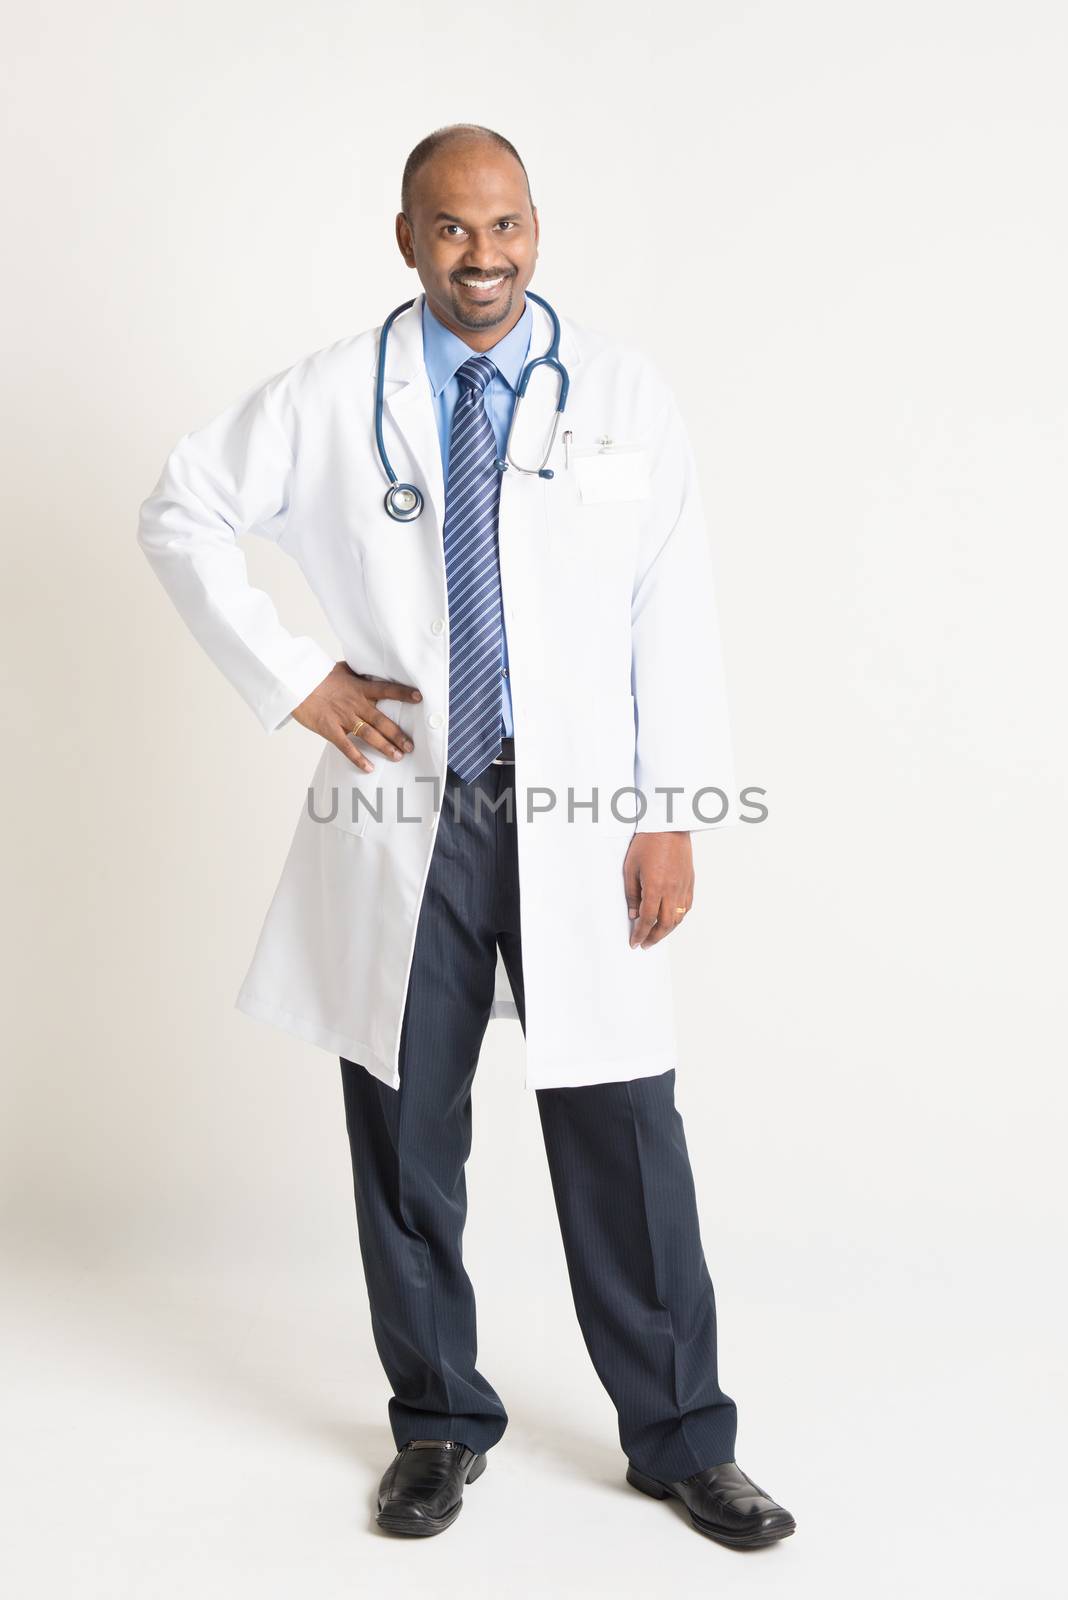 Full length mature Indian male medical doctor in uniform standing on plain background with shadow.